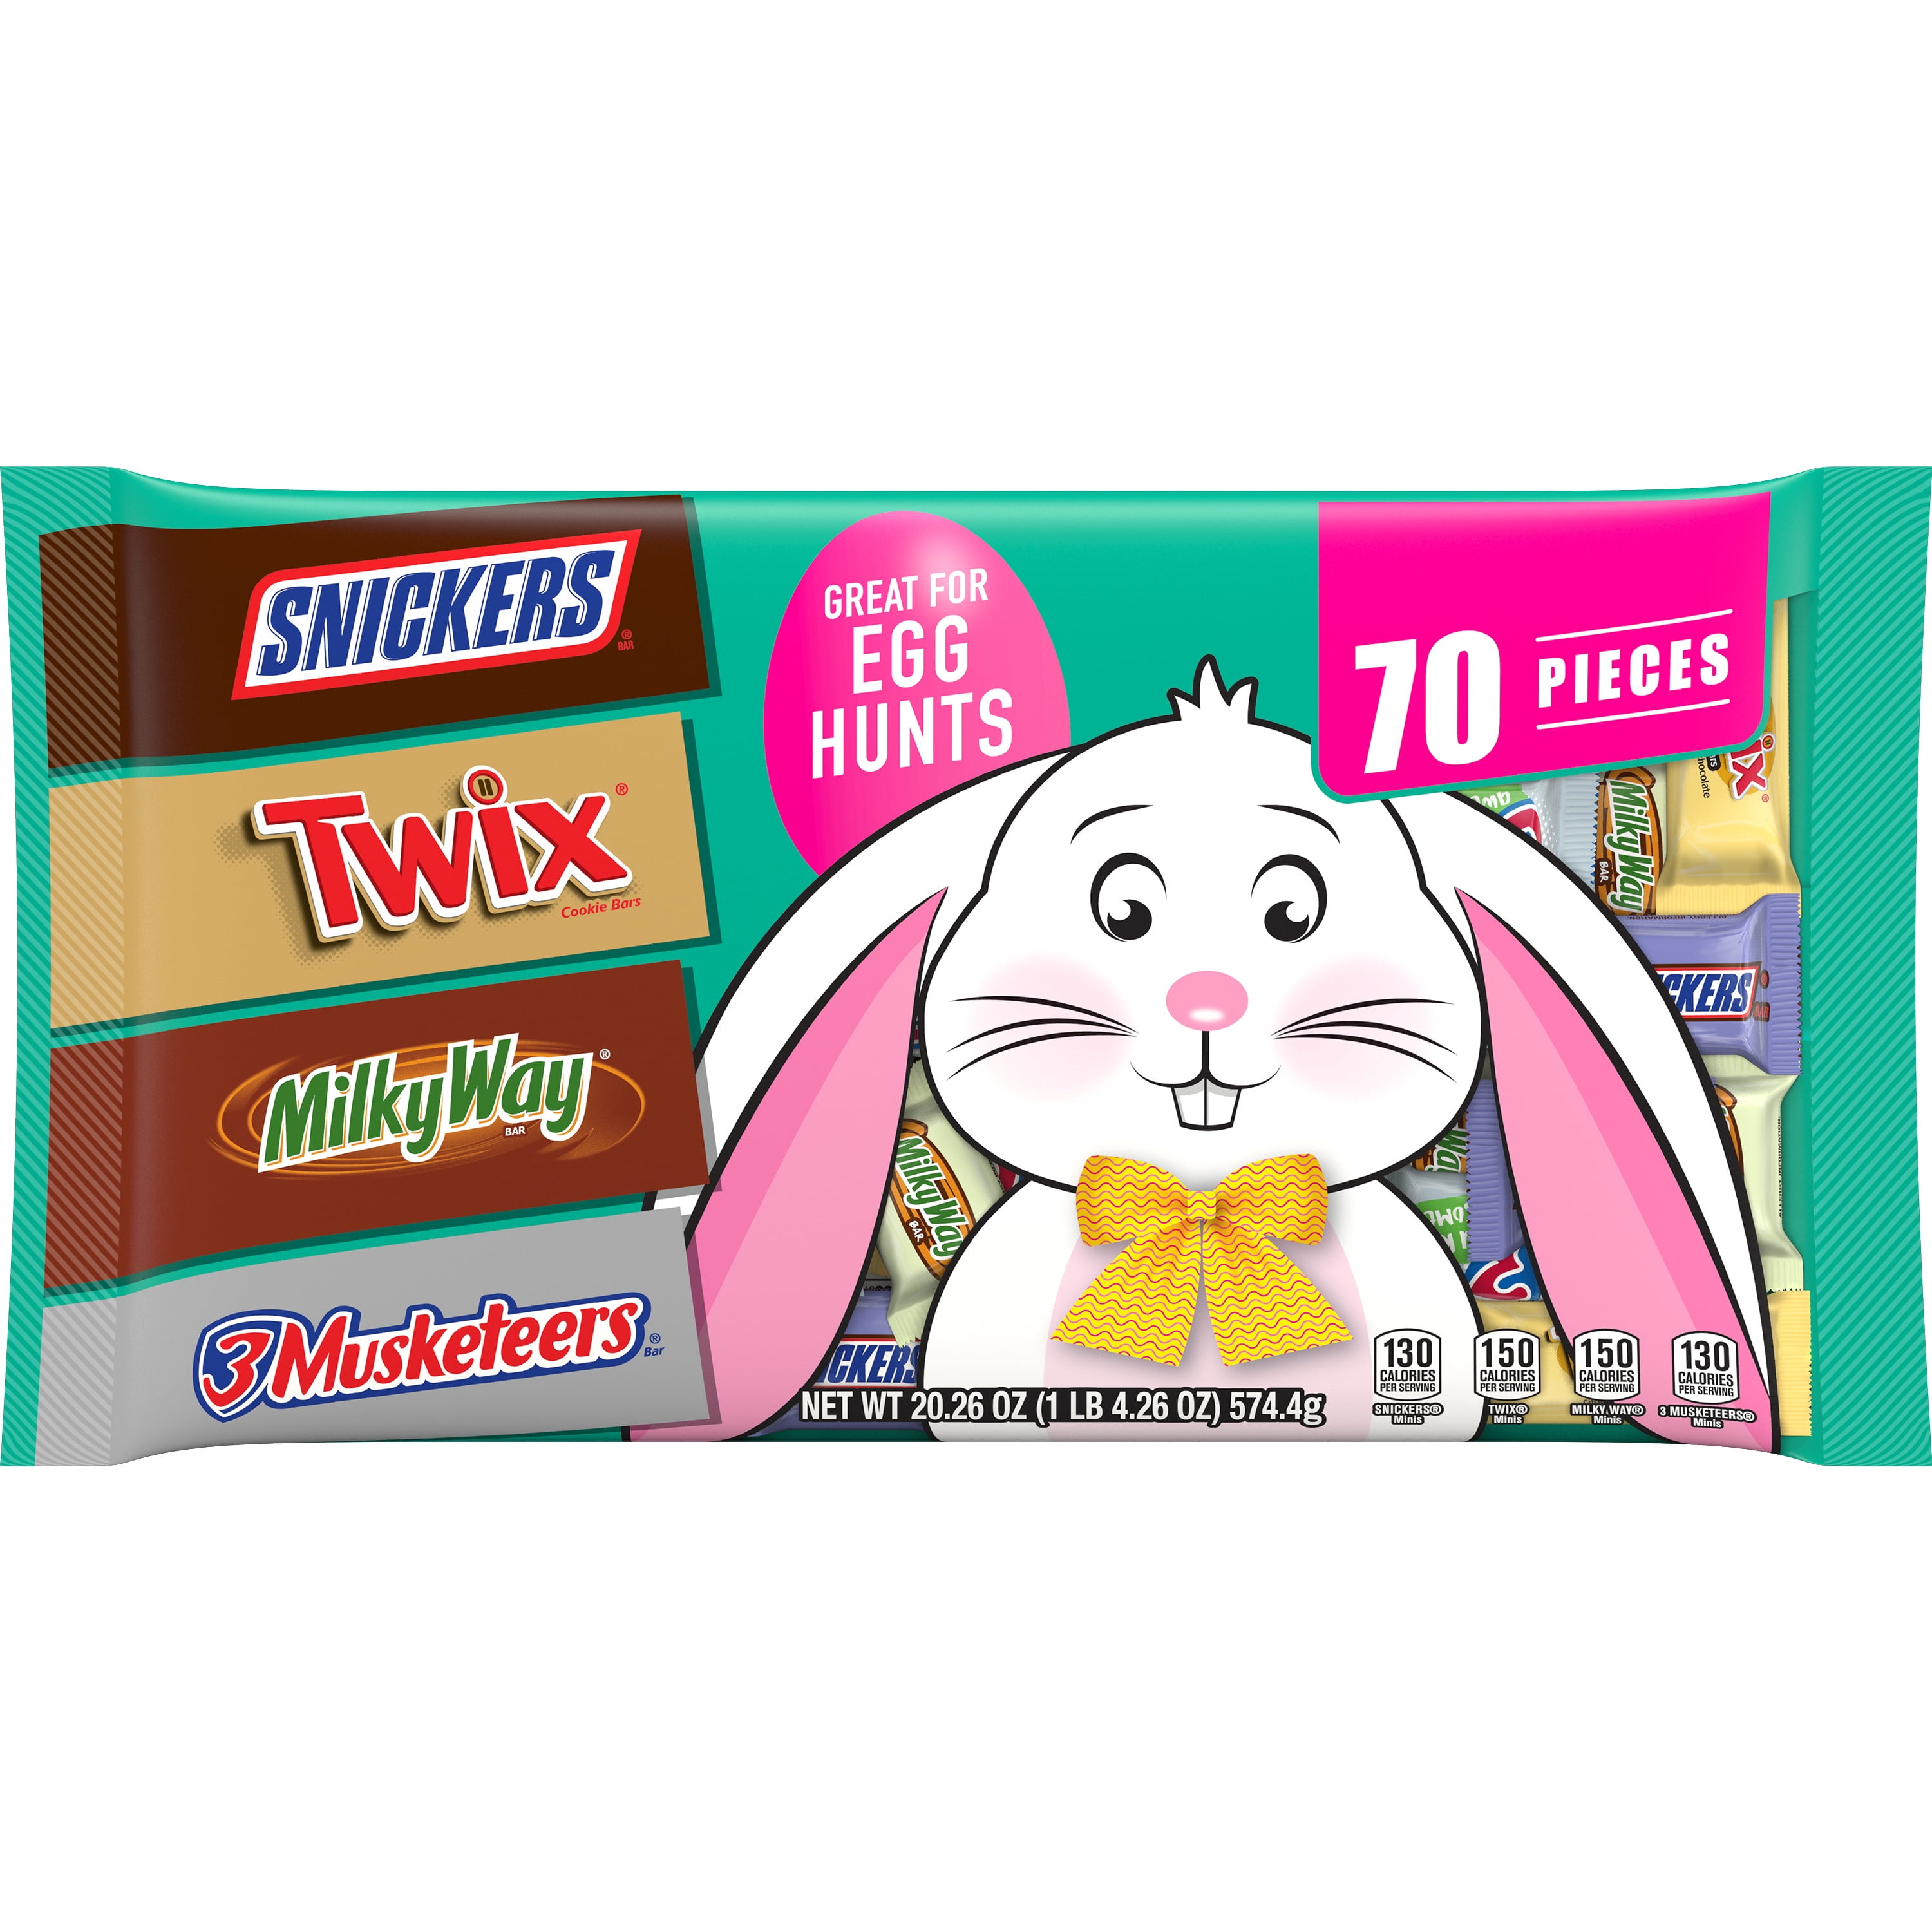 Snickers, Twix, Milky Way & 3 Musketeers Easter Chocolate Bars - 70 Ct